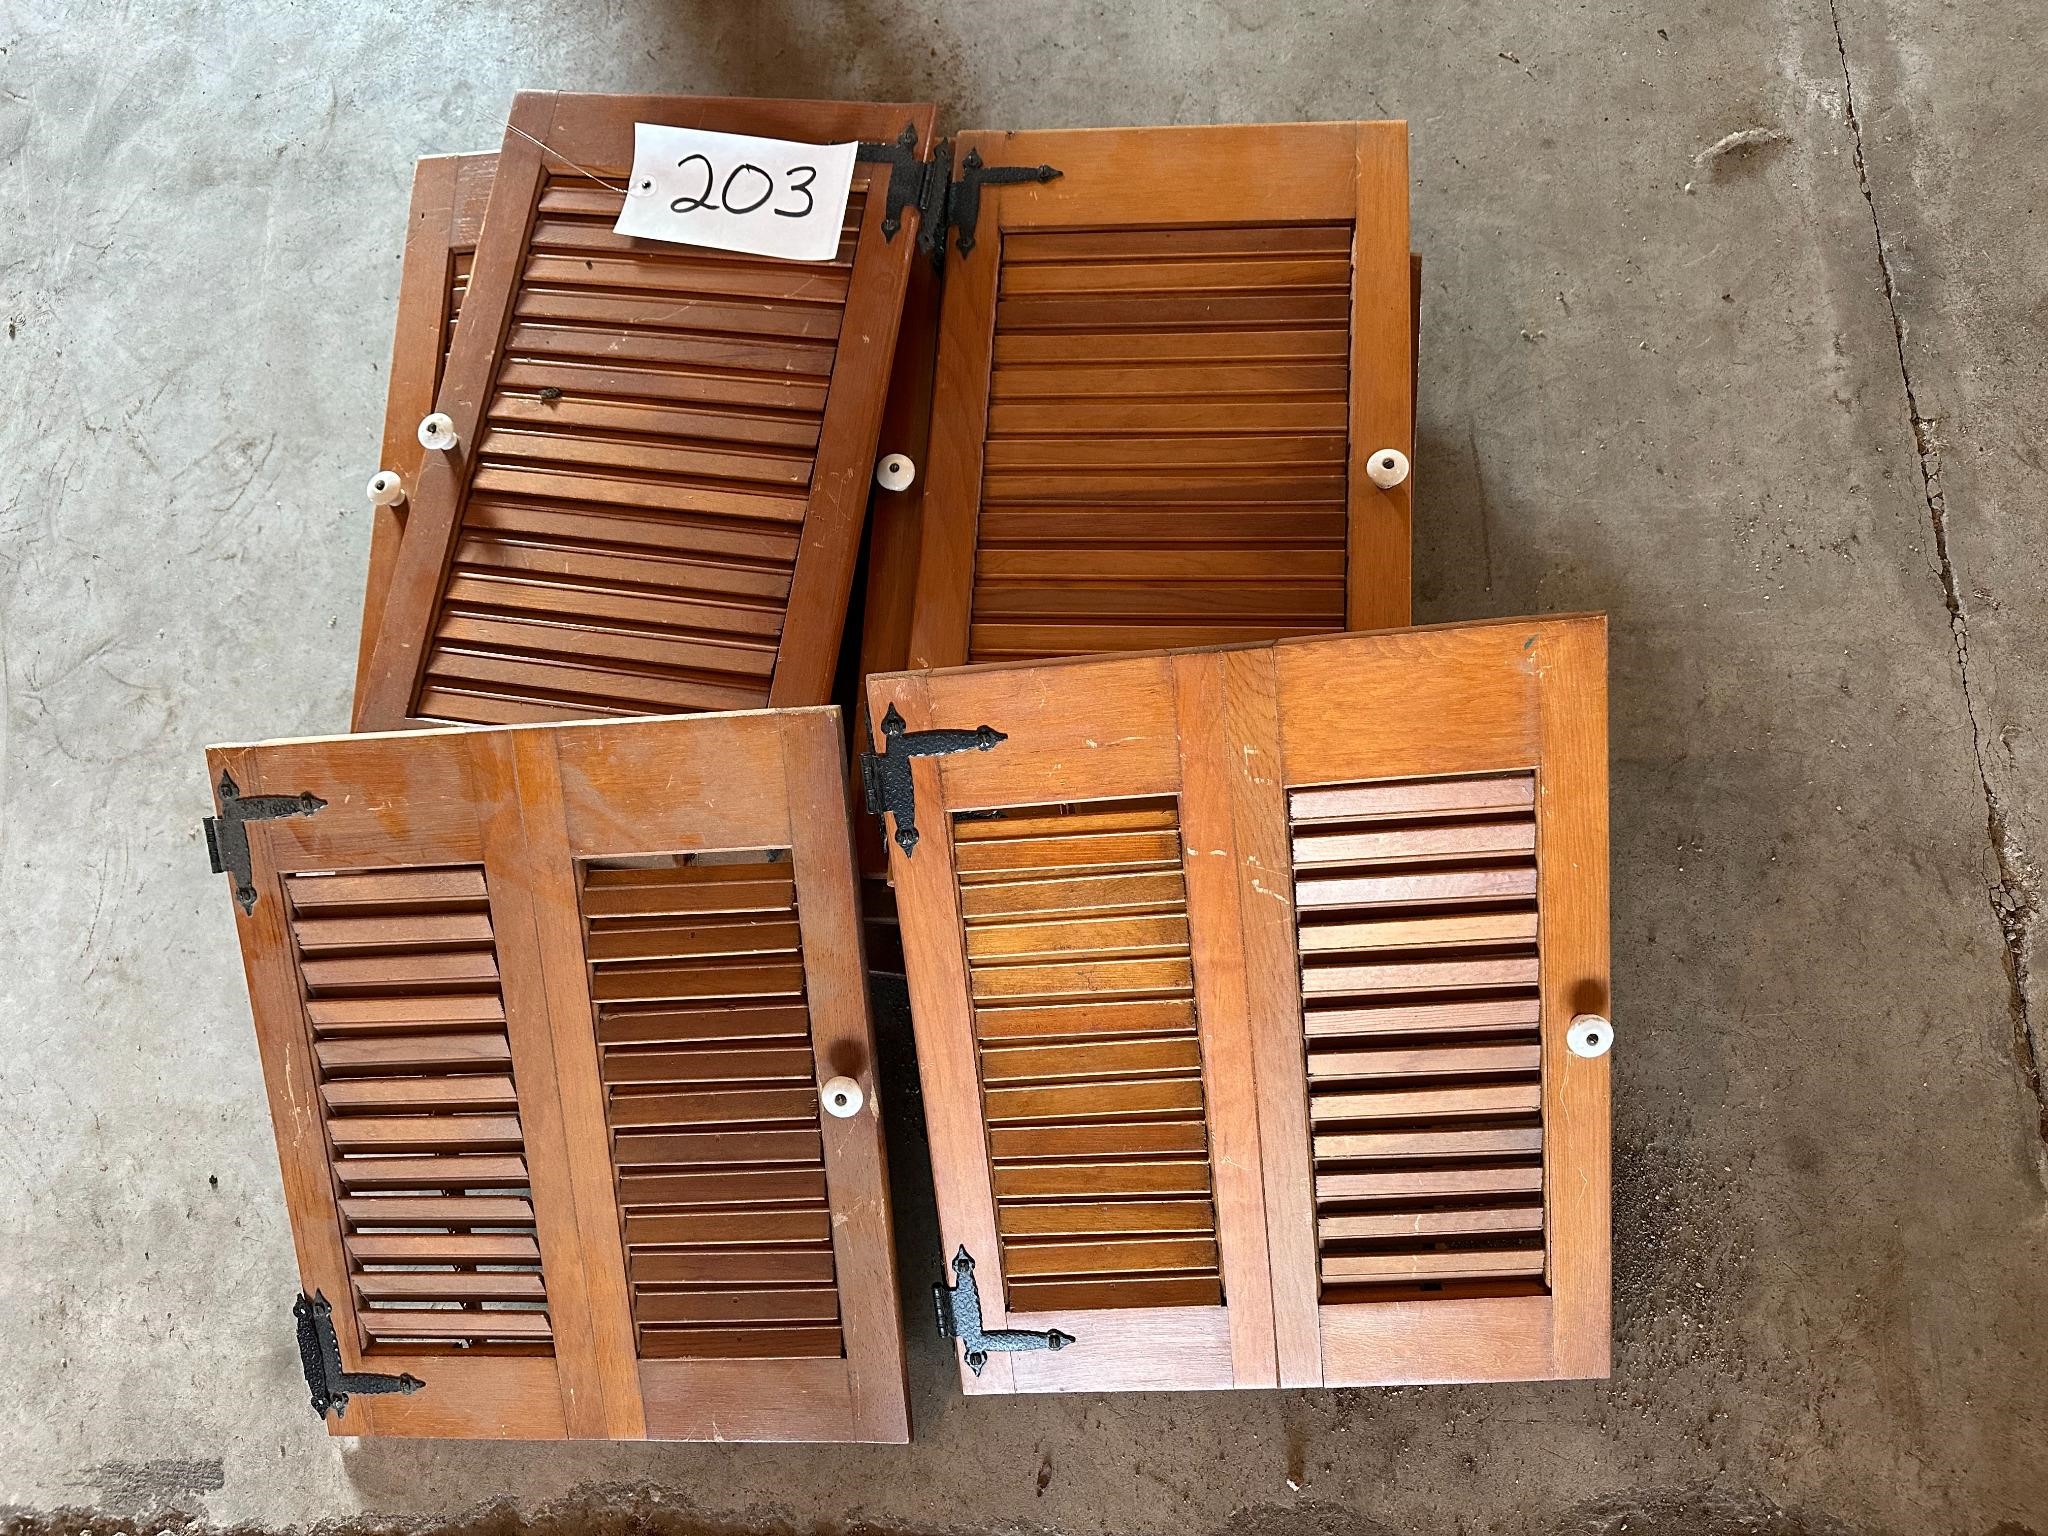 Multiple cabit doors and shutters